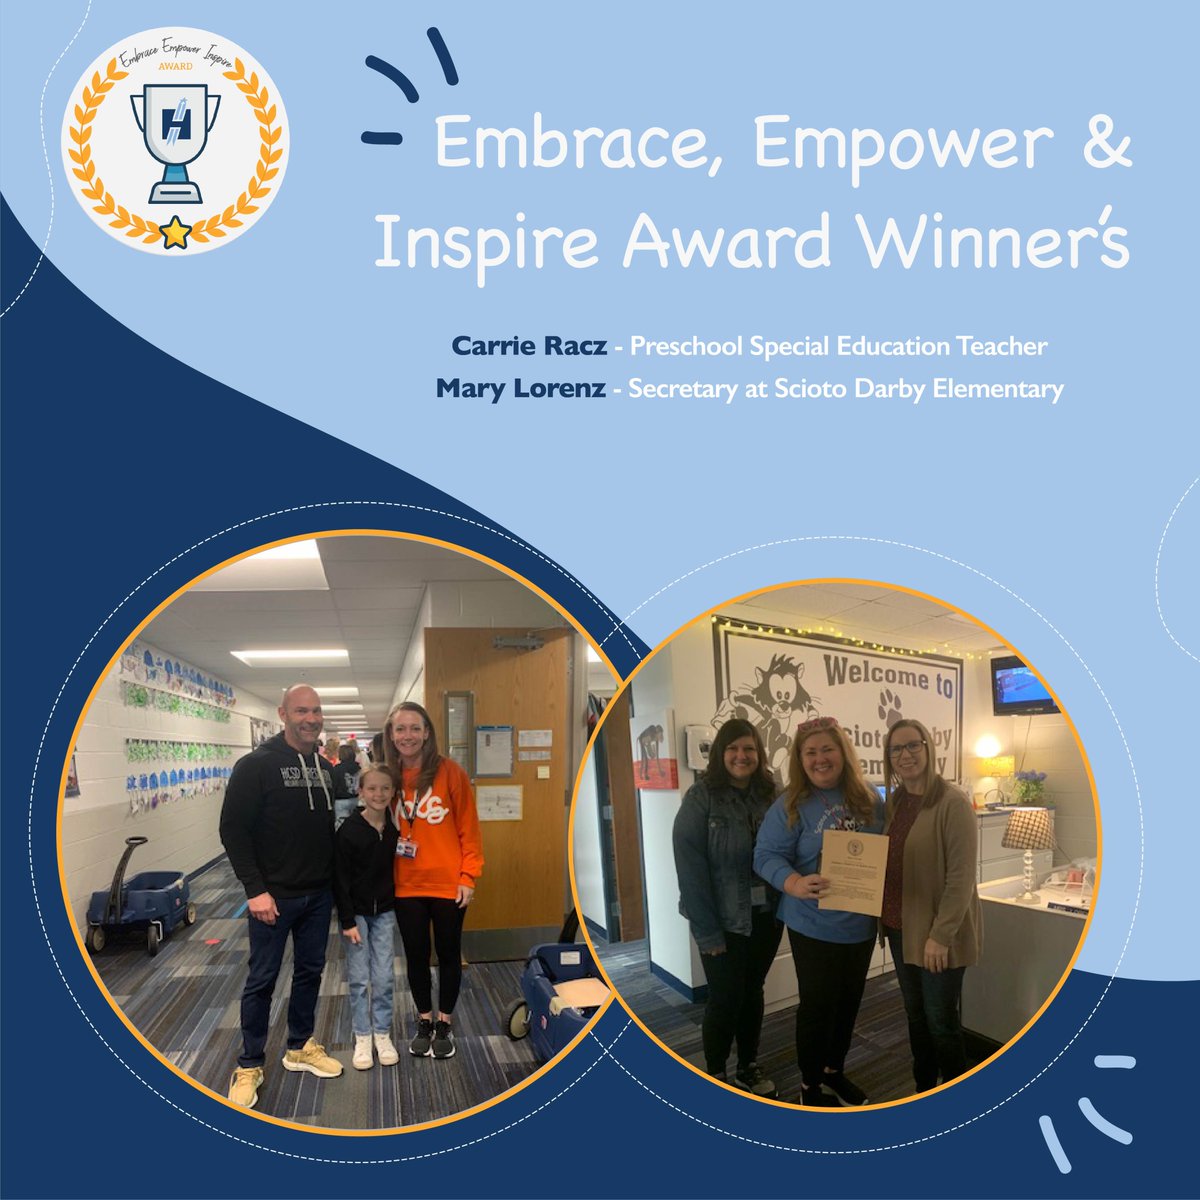 Congrats to these Embrace, Empower & Inspire Award winners, Carrie Racz and Mary Lorenz! If you know a staff member who goes above and beyond, you can nominate them for next month’s award by clicking the link below: docs.google.com/forms/d/e/1FAI……